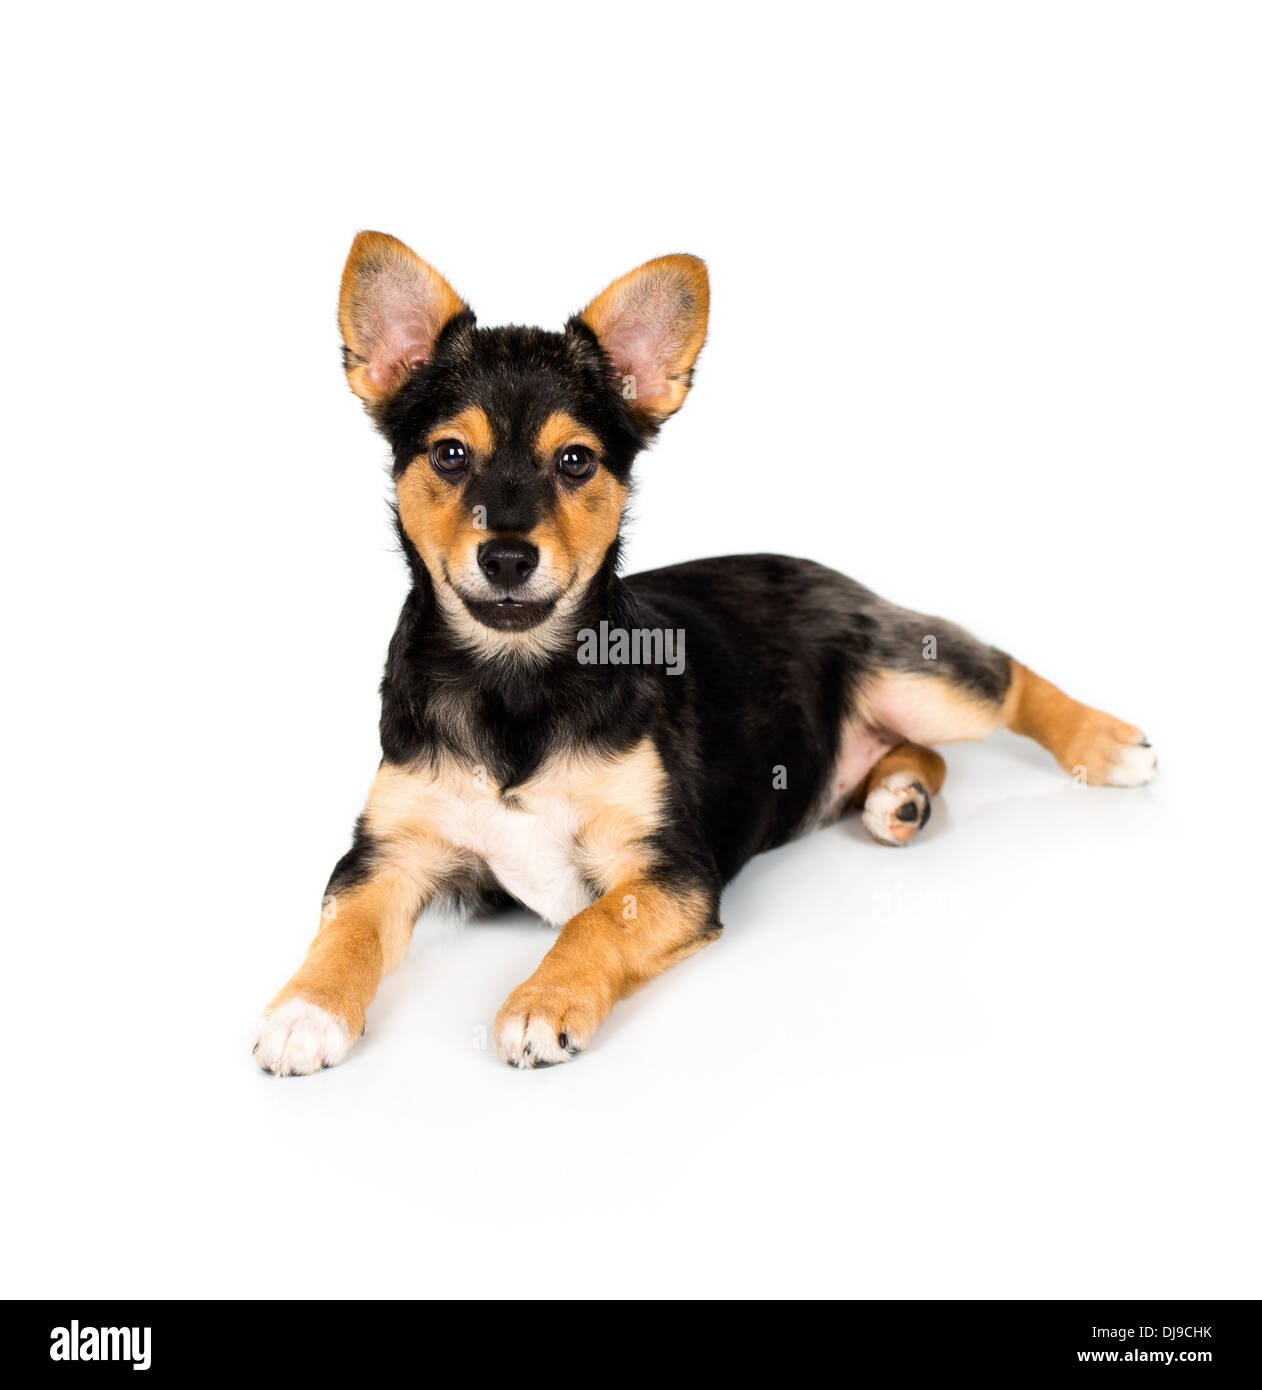 Little dog on a white background Stock Photo